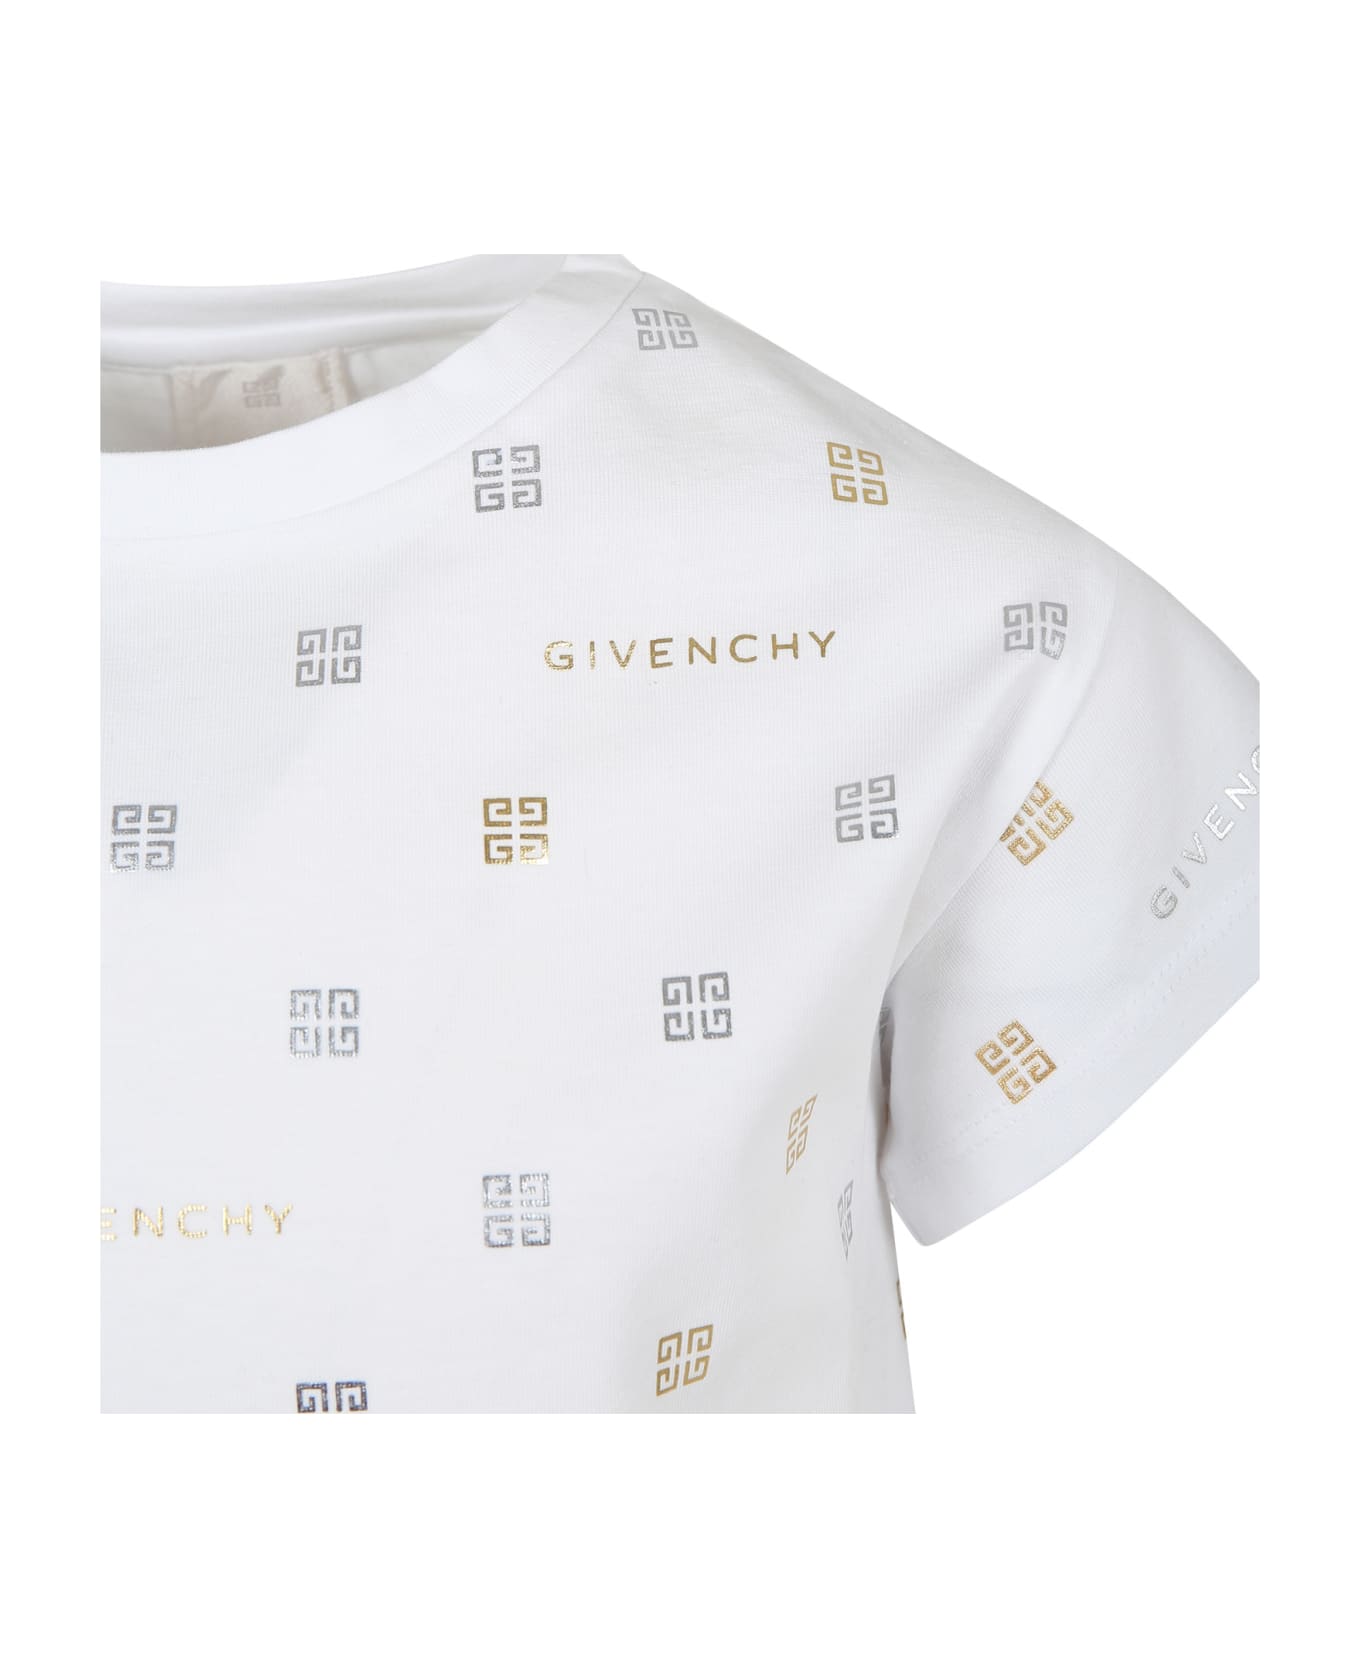 Givenchy White T-shirt For Girl With All-over 4g Motif - White